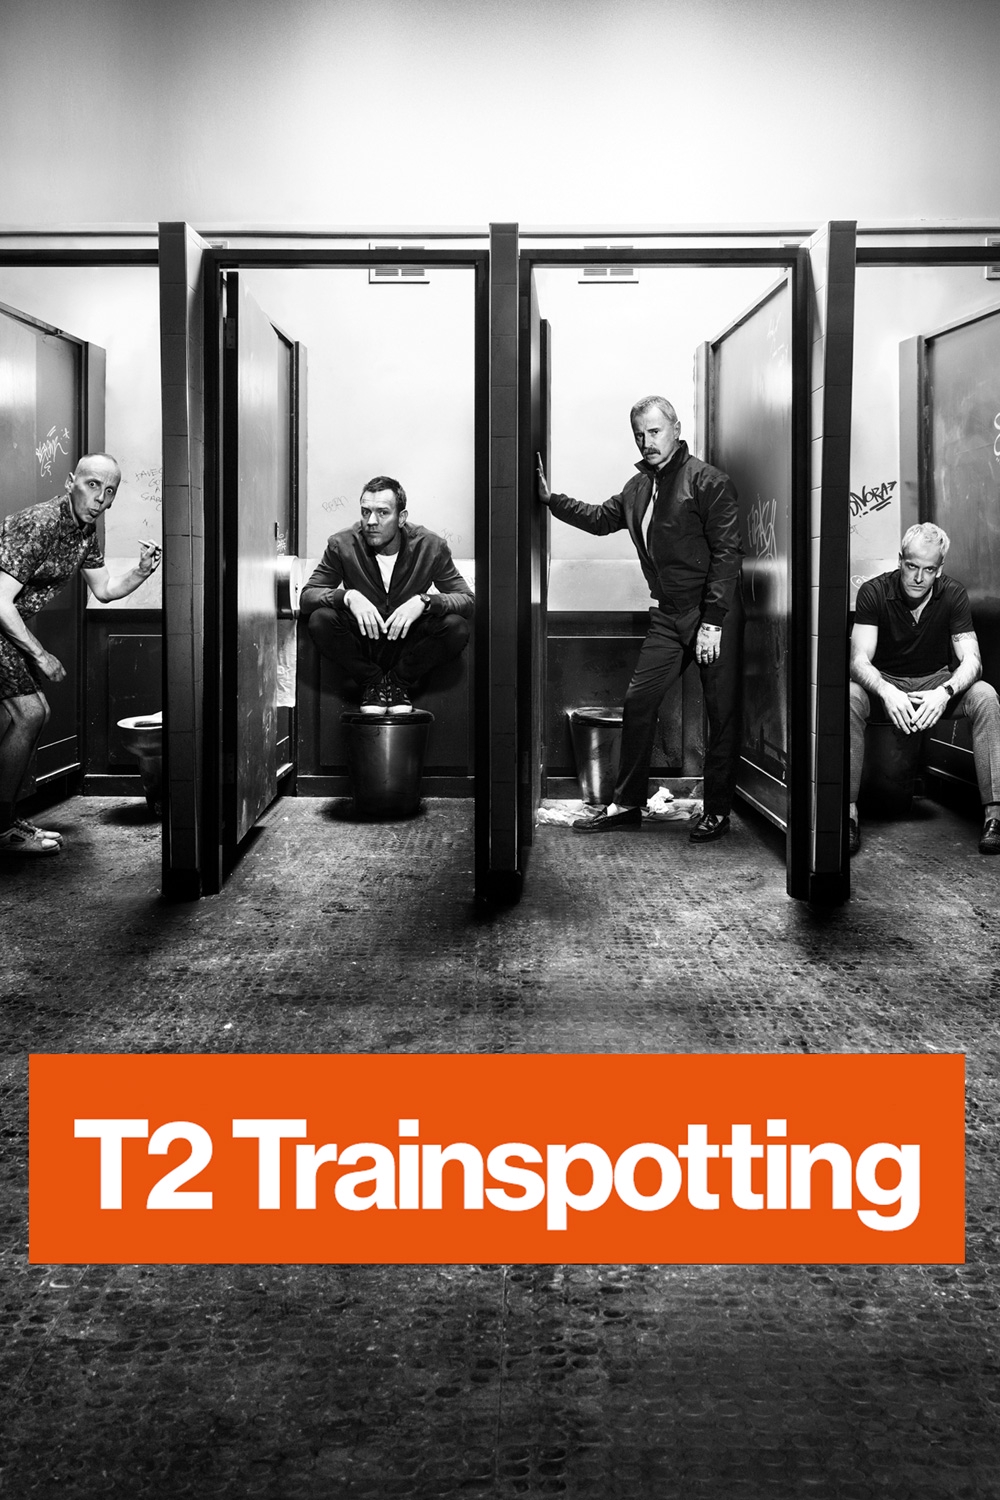 T2 Trainspotting': The Early Reviews - The New York Times